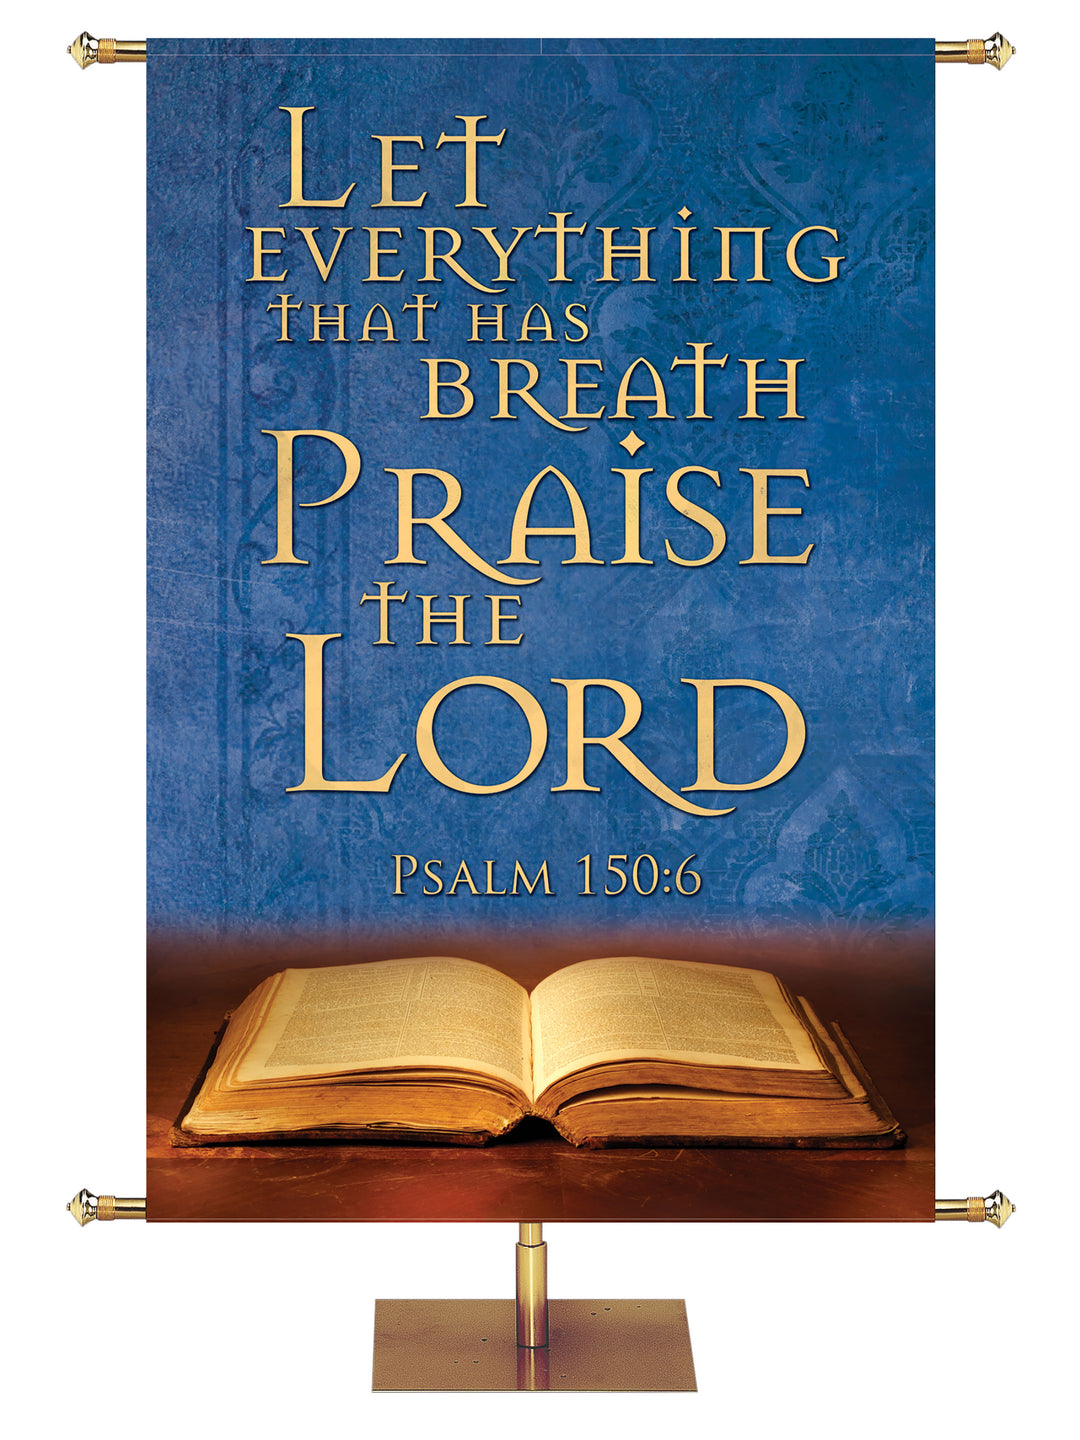 Scriptures For Life Praise the Lord - Year Round Banners - PraiseBanners